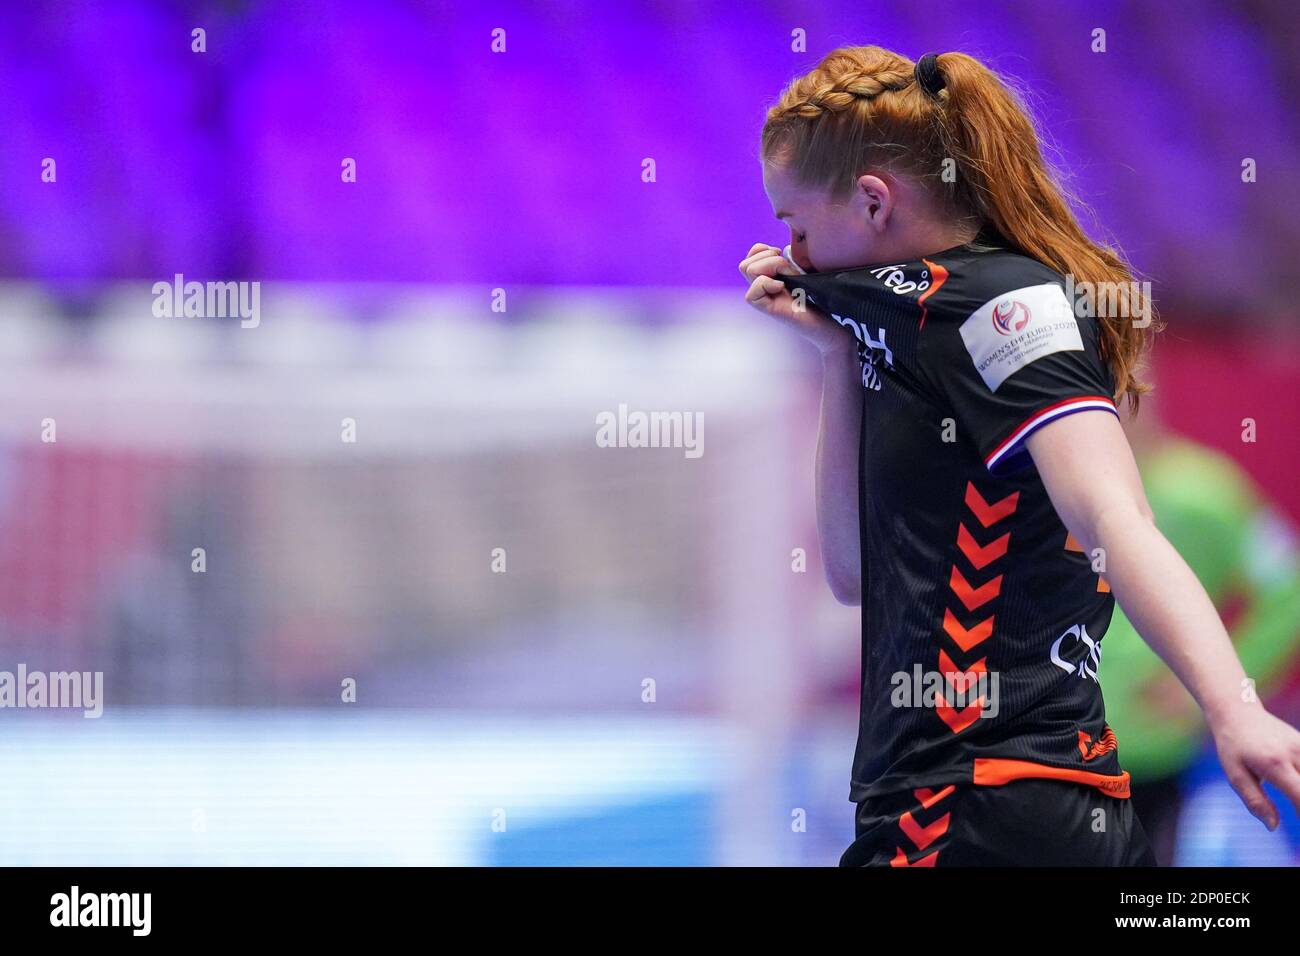 HERNING, DENMARK - DECEMBER 18: Dione Housheer of Netherlands during the Women's EHF Euro 2020 match between Russia and The Netherlands at Jyske Bank Stock Photo